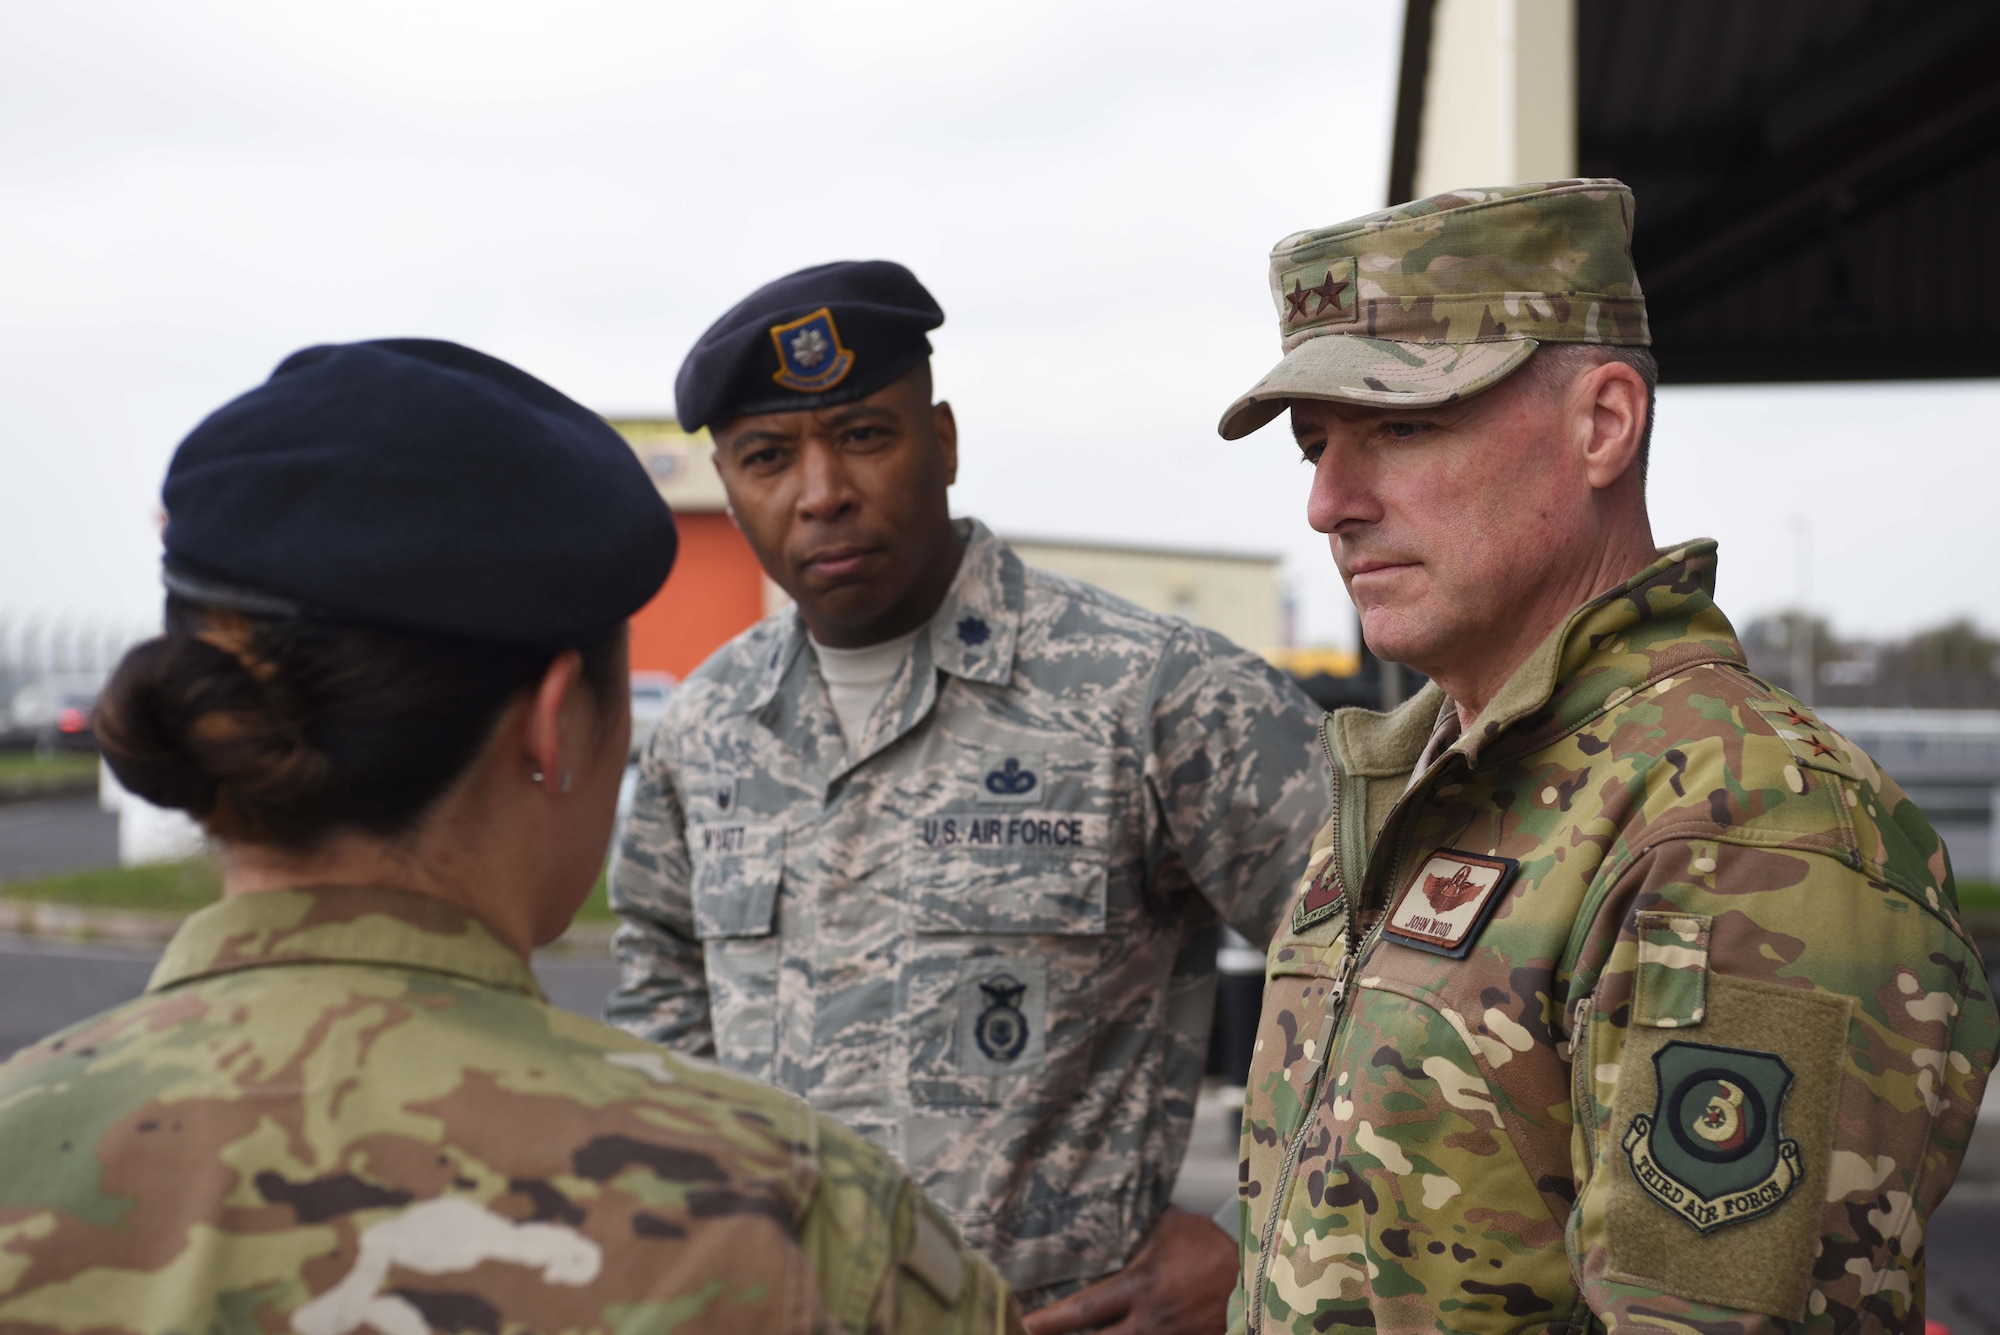 U.S. Air Force Maj. Gen. John Wood, Third Air Force commander, listens to U.S. Air Force Staff Sgt. Katherine Tedrow discuss 100th Security Forces Squadron infrastructure developments at RAF Mildenhall, England, April 3, 2019. Third AF leadership toured the 100th Logistics Readiness Squadron hangar, the 100th Communications Squadron control facility and the 100th Maintenance Squadron aircraft ground equipment shop. (U.S. Air Force photo by Airman 1st Class Brandon Esau)